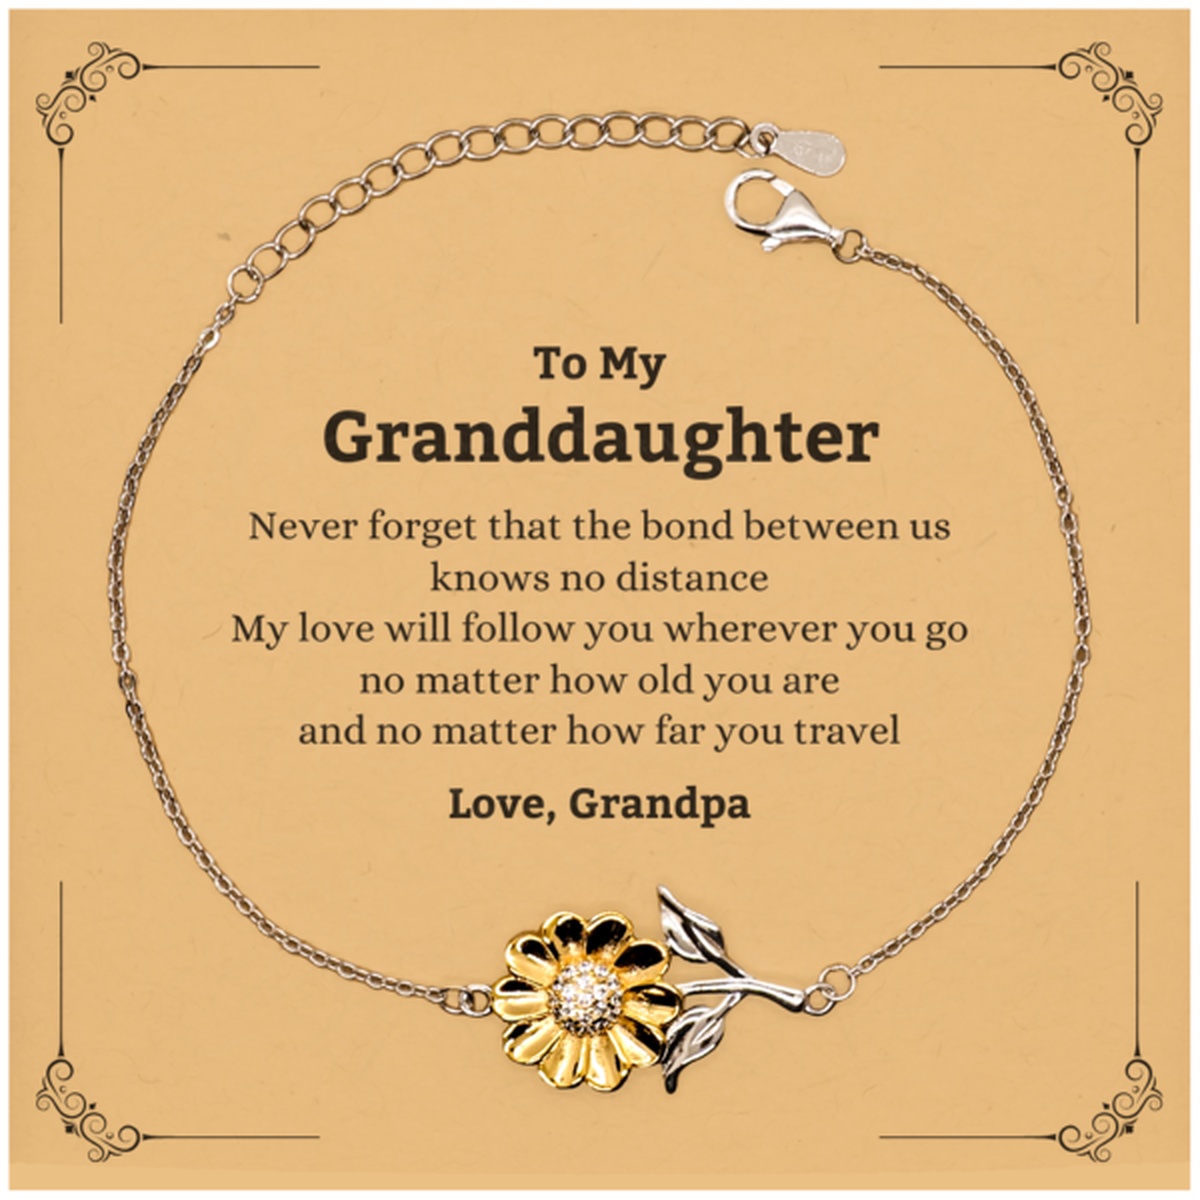 Granddaughter Birthday Gifts from Grandpa, Adjustable Sunflower Bracelet for Granddaughter Christmas Graduation Unique Gifts Granddaughter Never forget that the bond between us knows no distance. Love, Grandpa